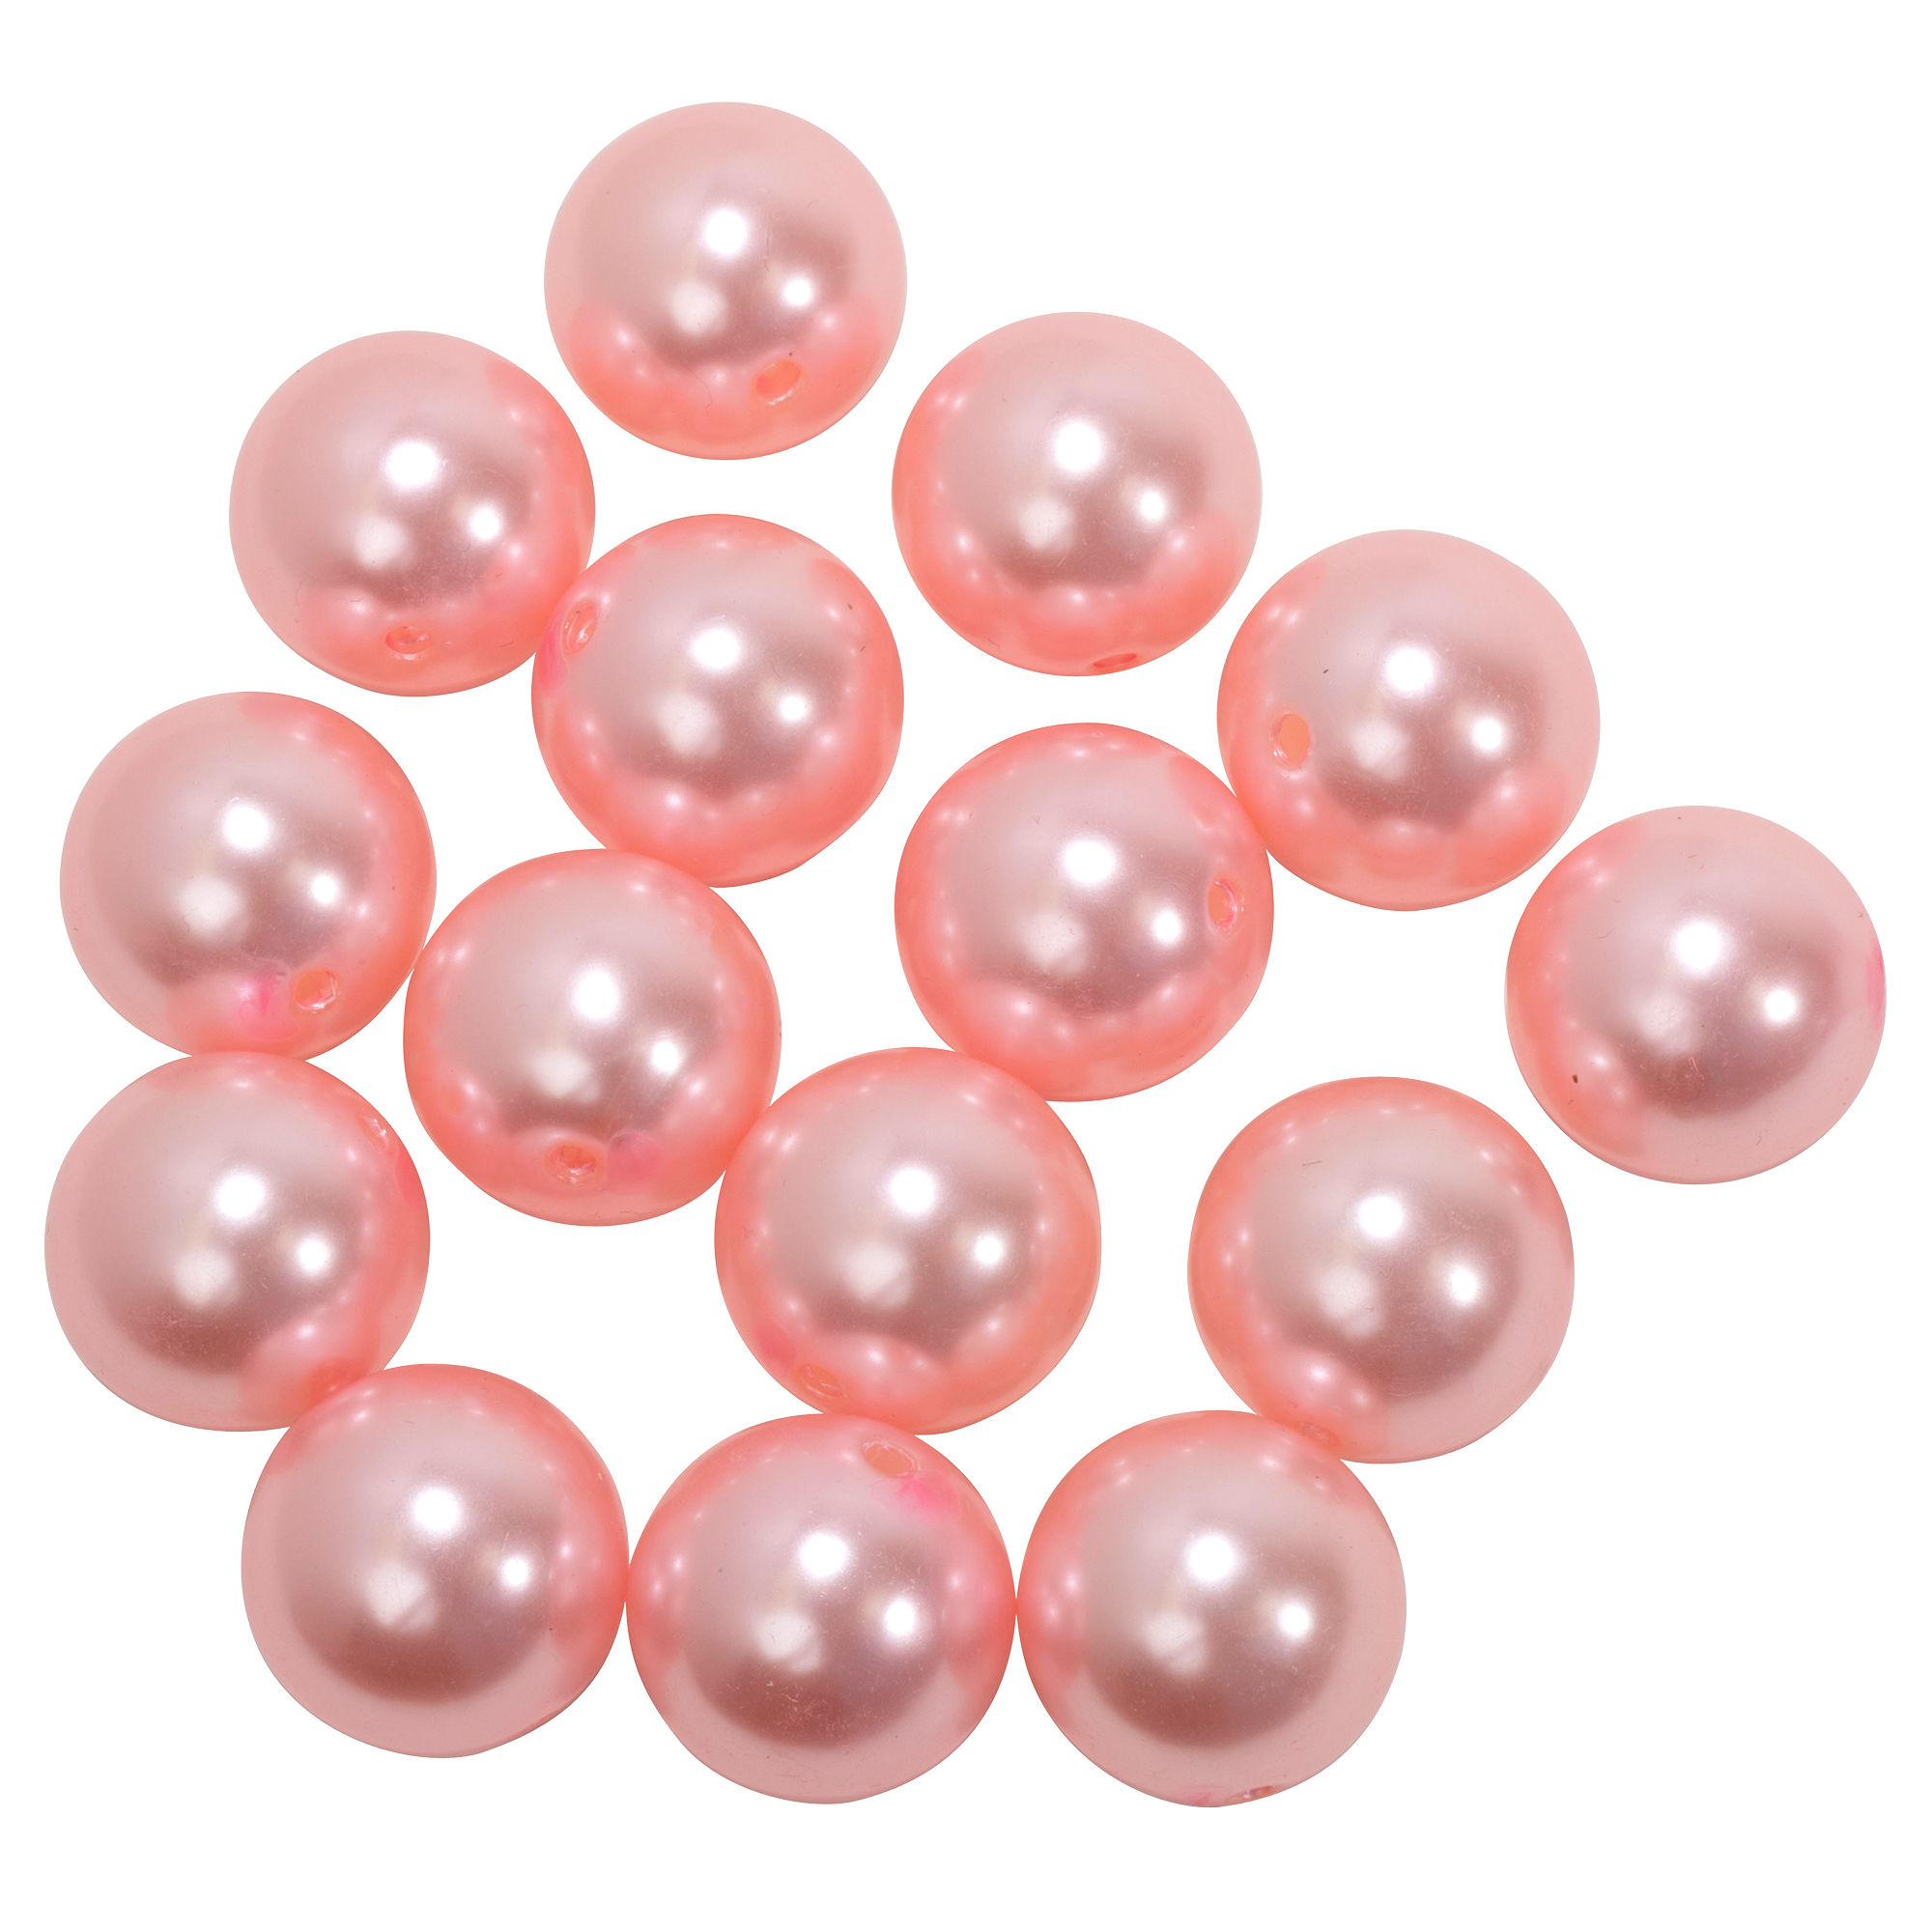 30mm Craft Pearl Beads With Hole 454g/Bag - Pink